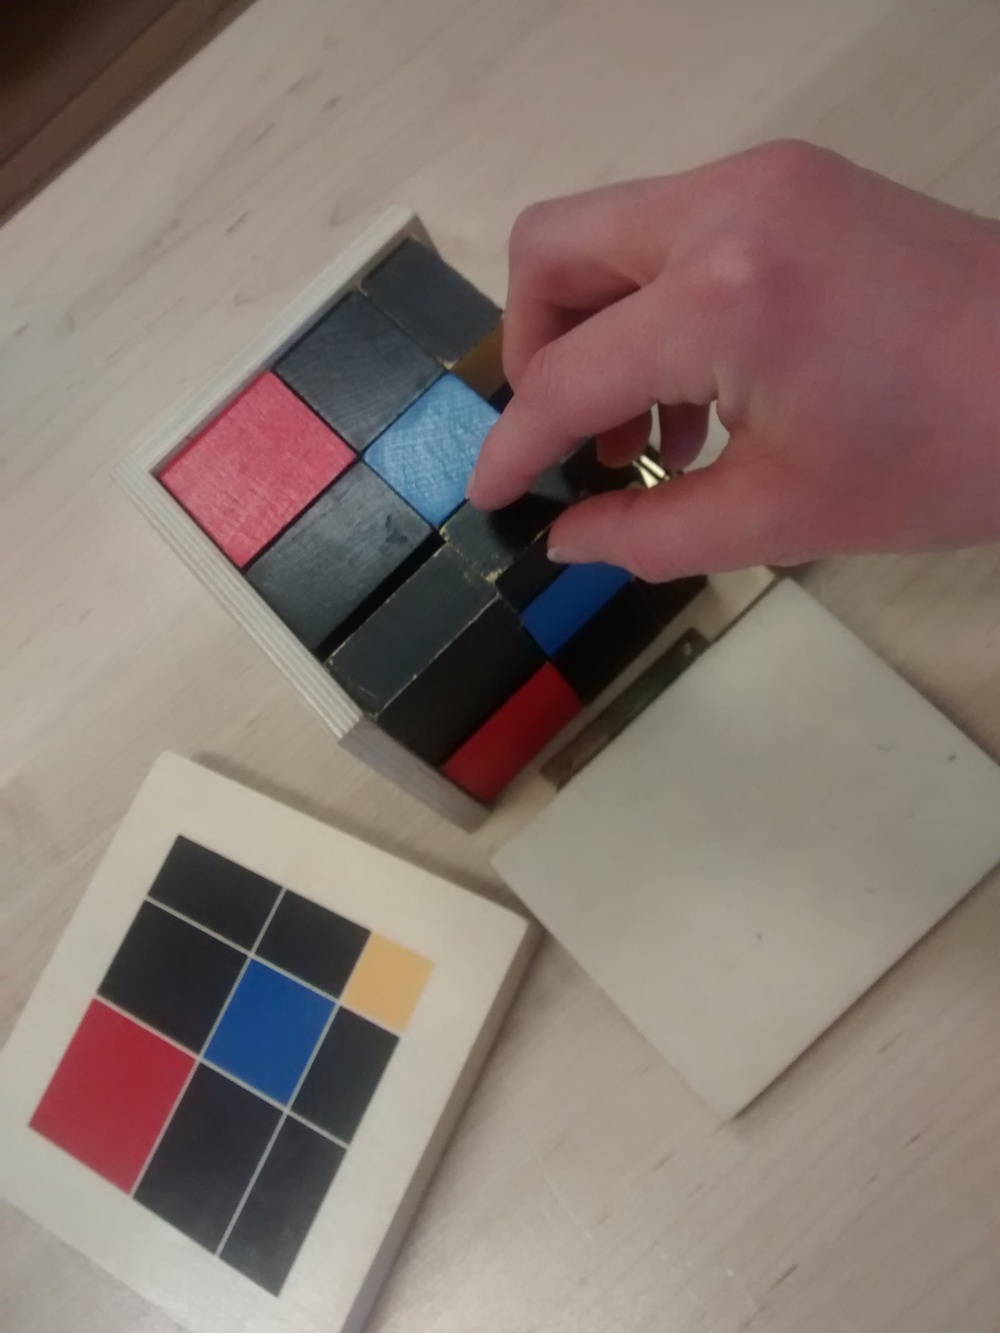 Maria Burr, Assistant Primary Three I chose the trinomial cube because as an adult, I very much enjoy building the trinomial cube. I just love how all the pieces fit together so beautifully!